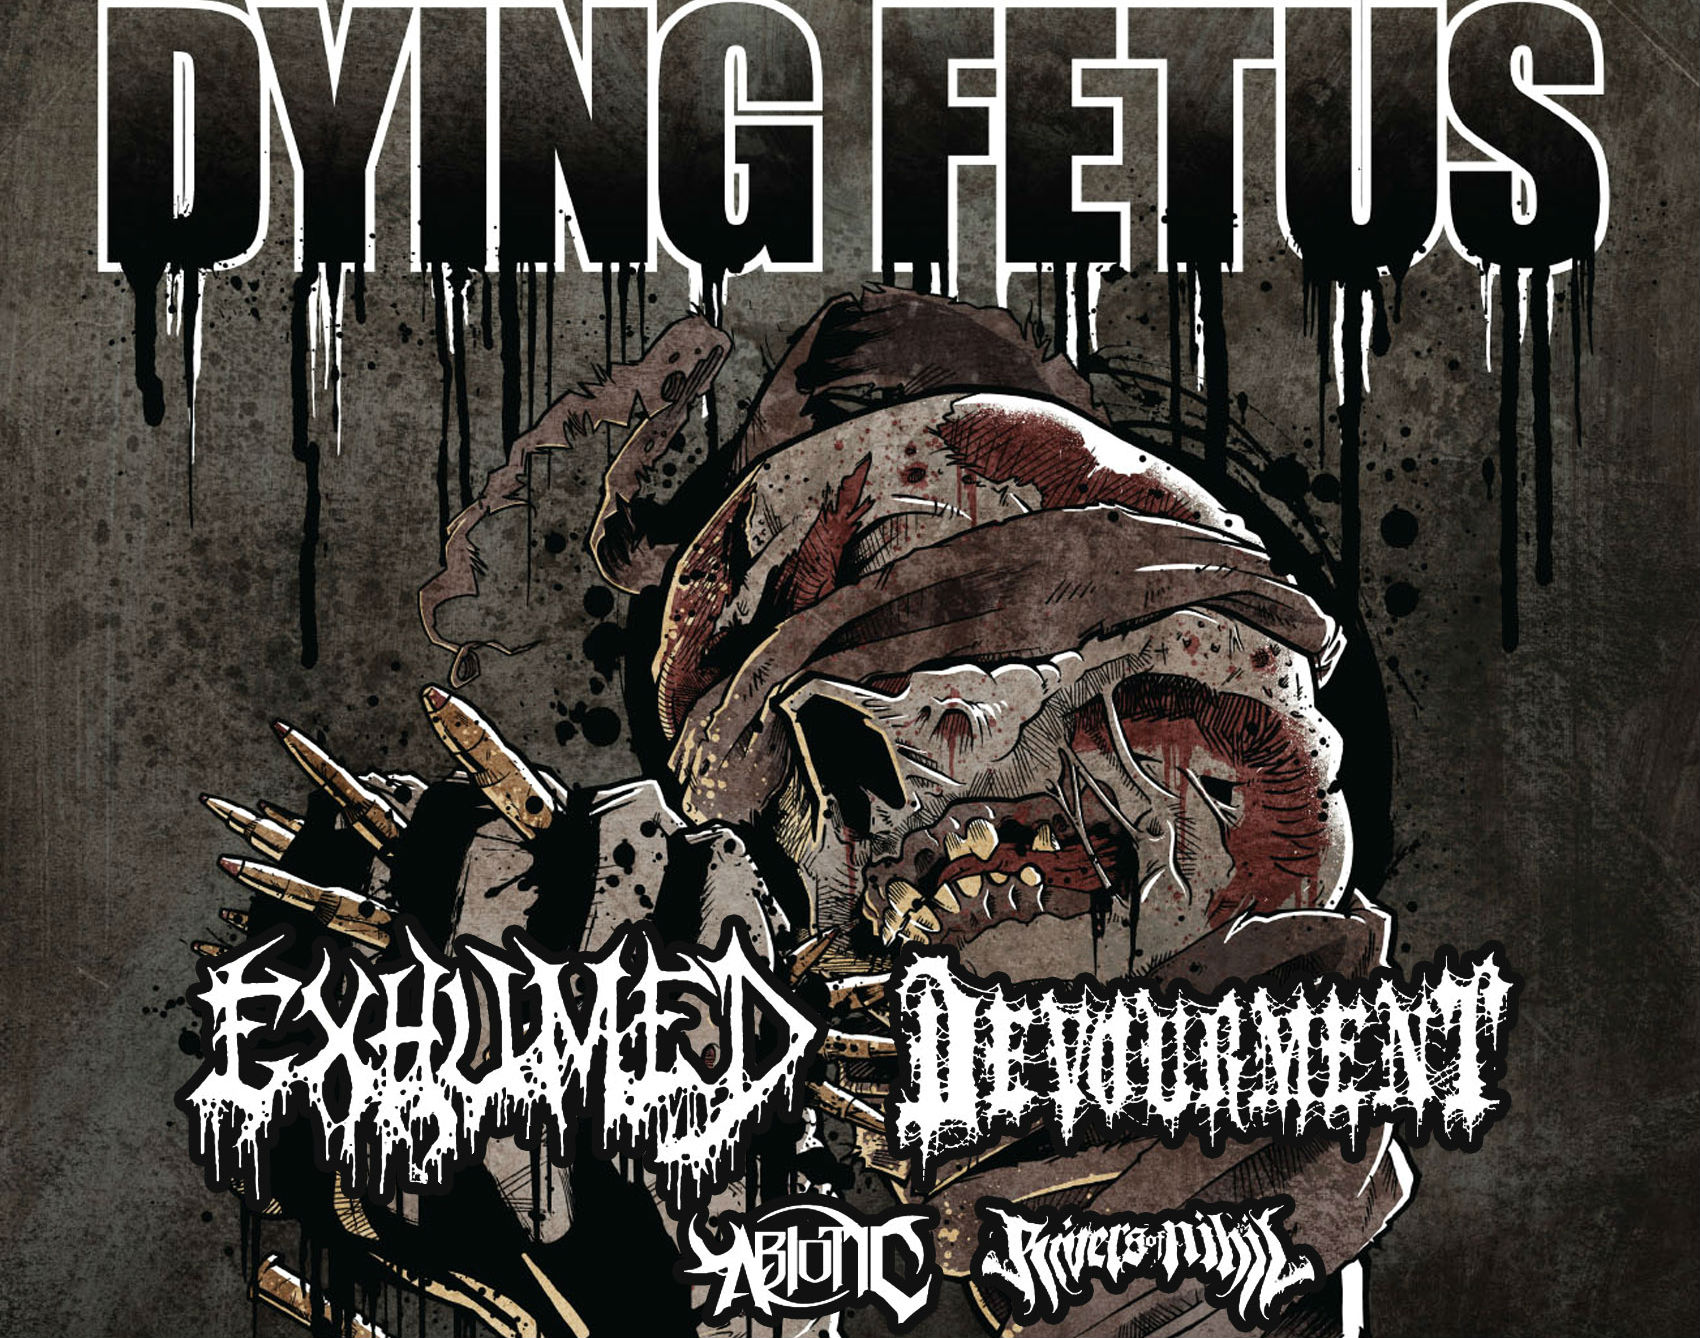 dying, Fetus, Death, Metal, Heavy, Concert, Poster, Ht Wallpaper